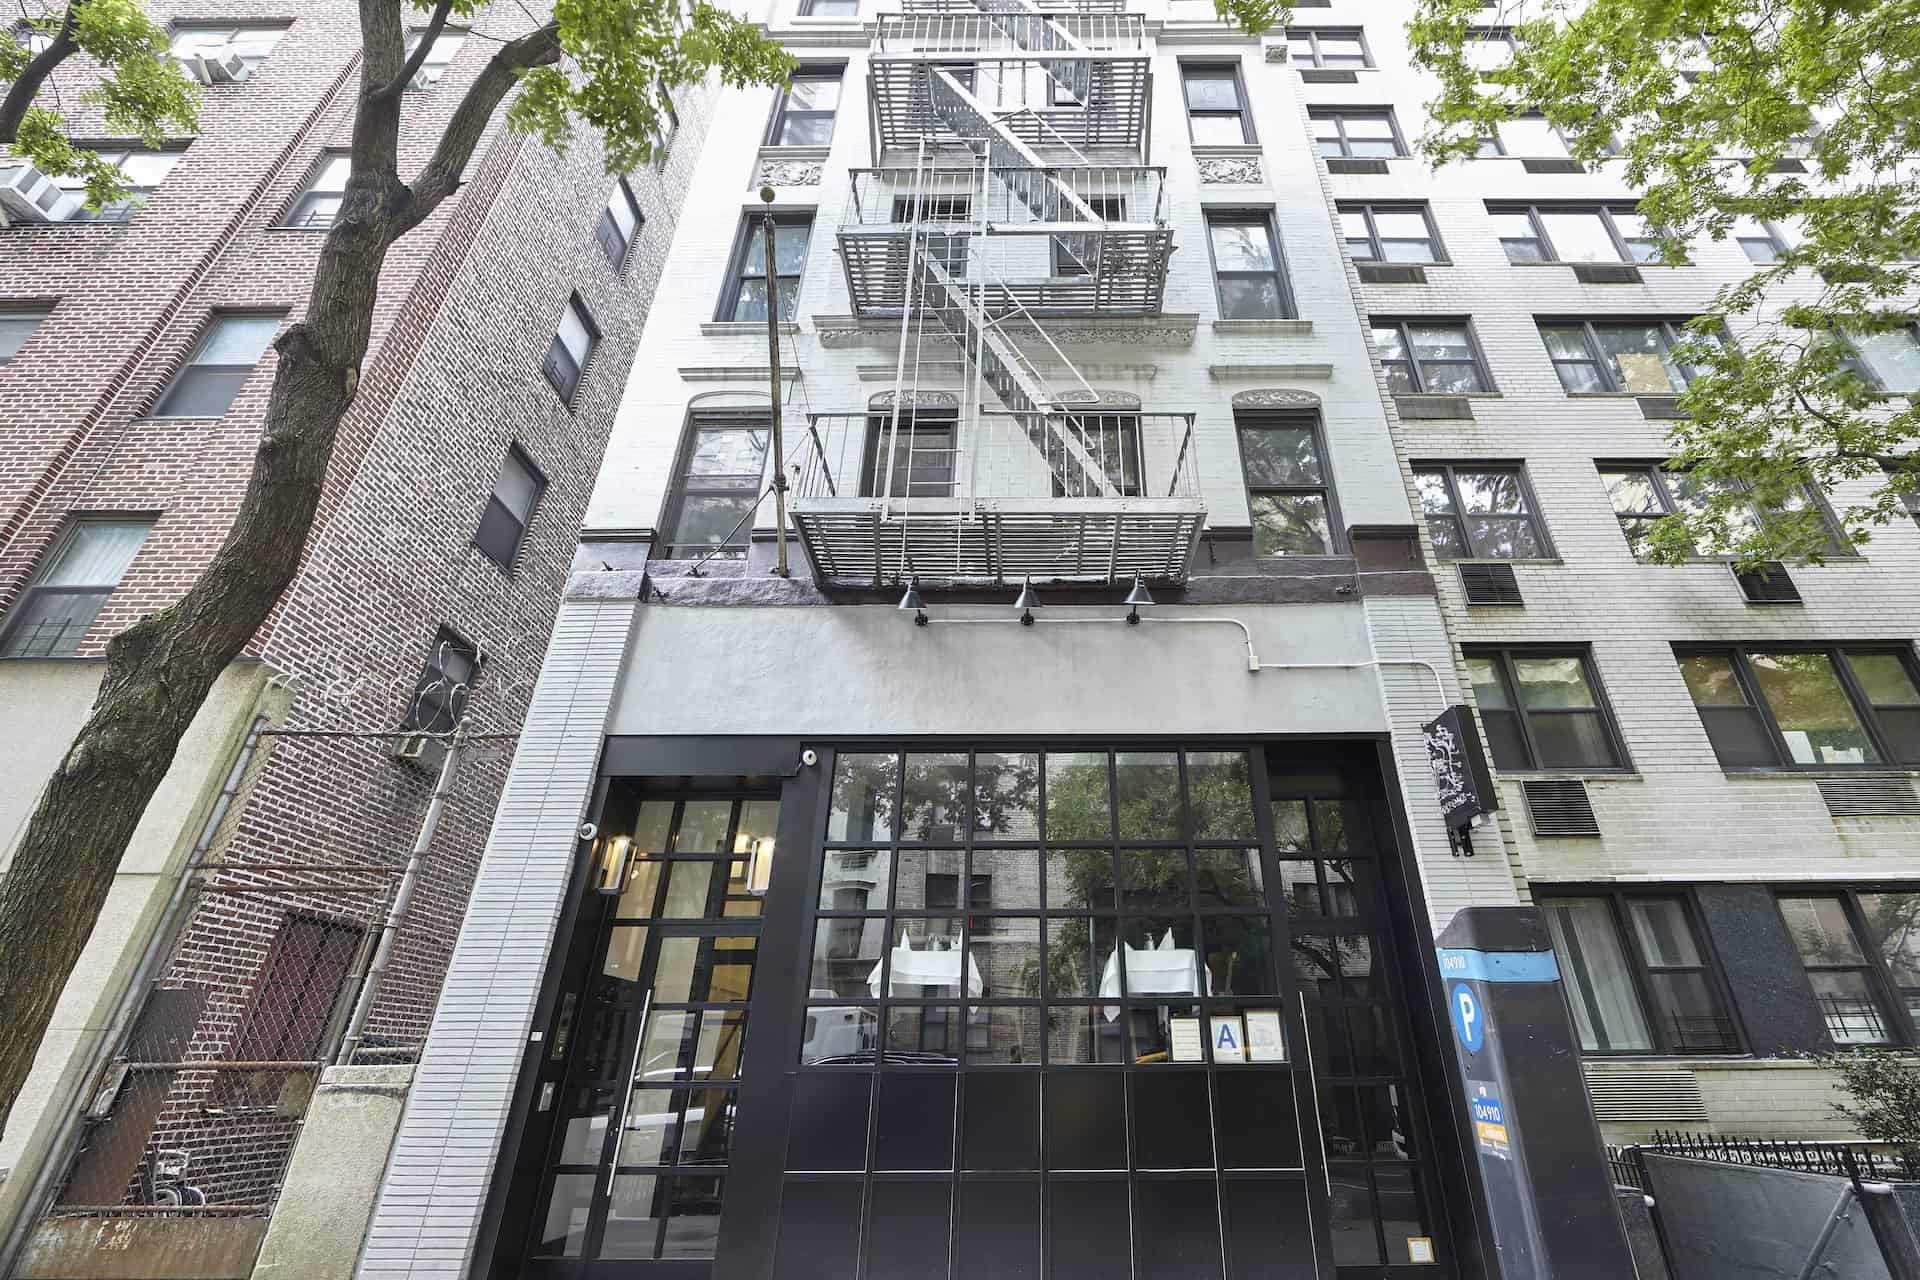 Entrance to 244 East 46th Street apartments in New York. Brick residential building with tall windows and glass door.